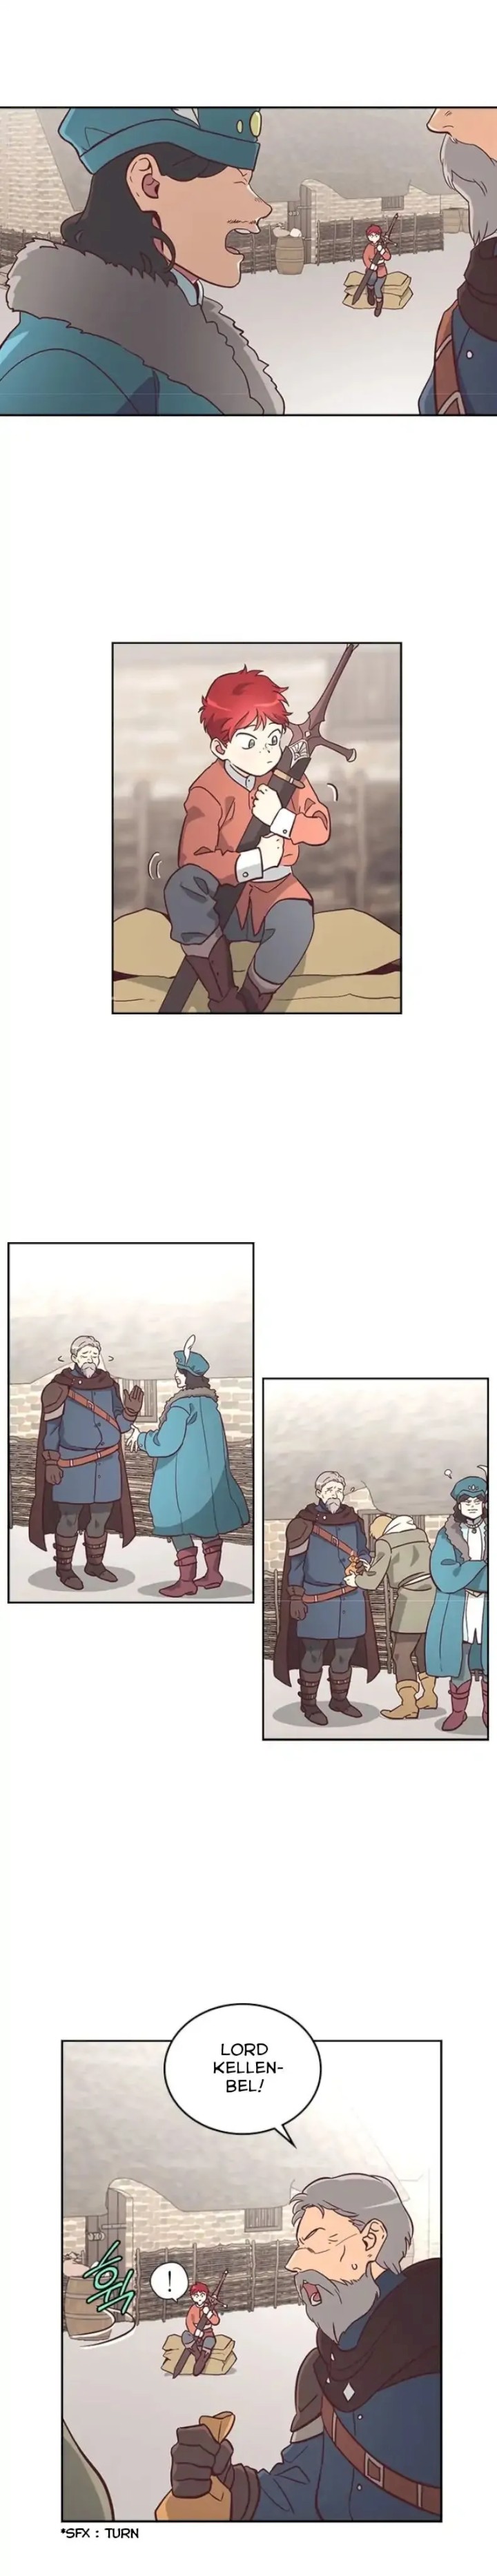 Emperor And The Female Knight - Chapter 1 Page 14